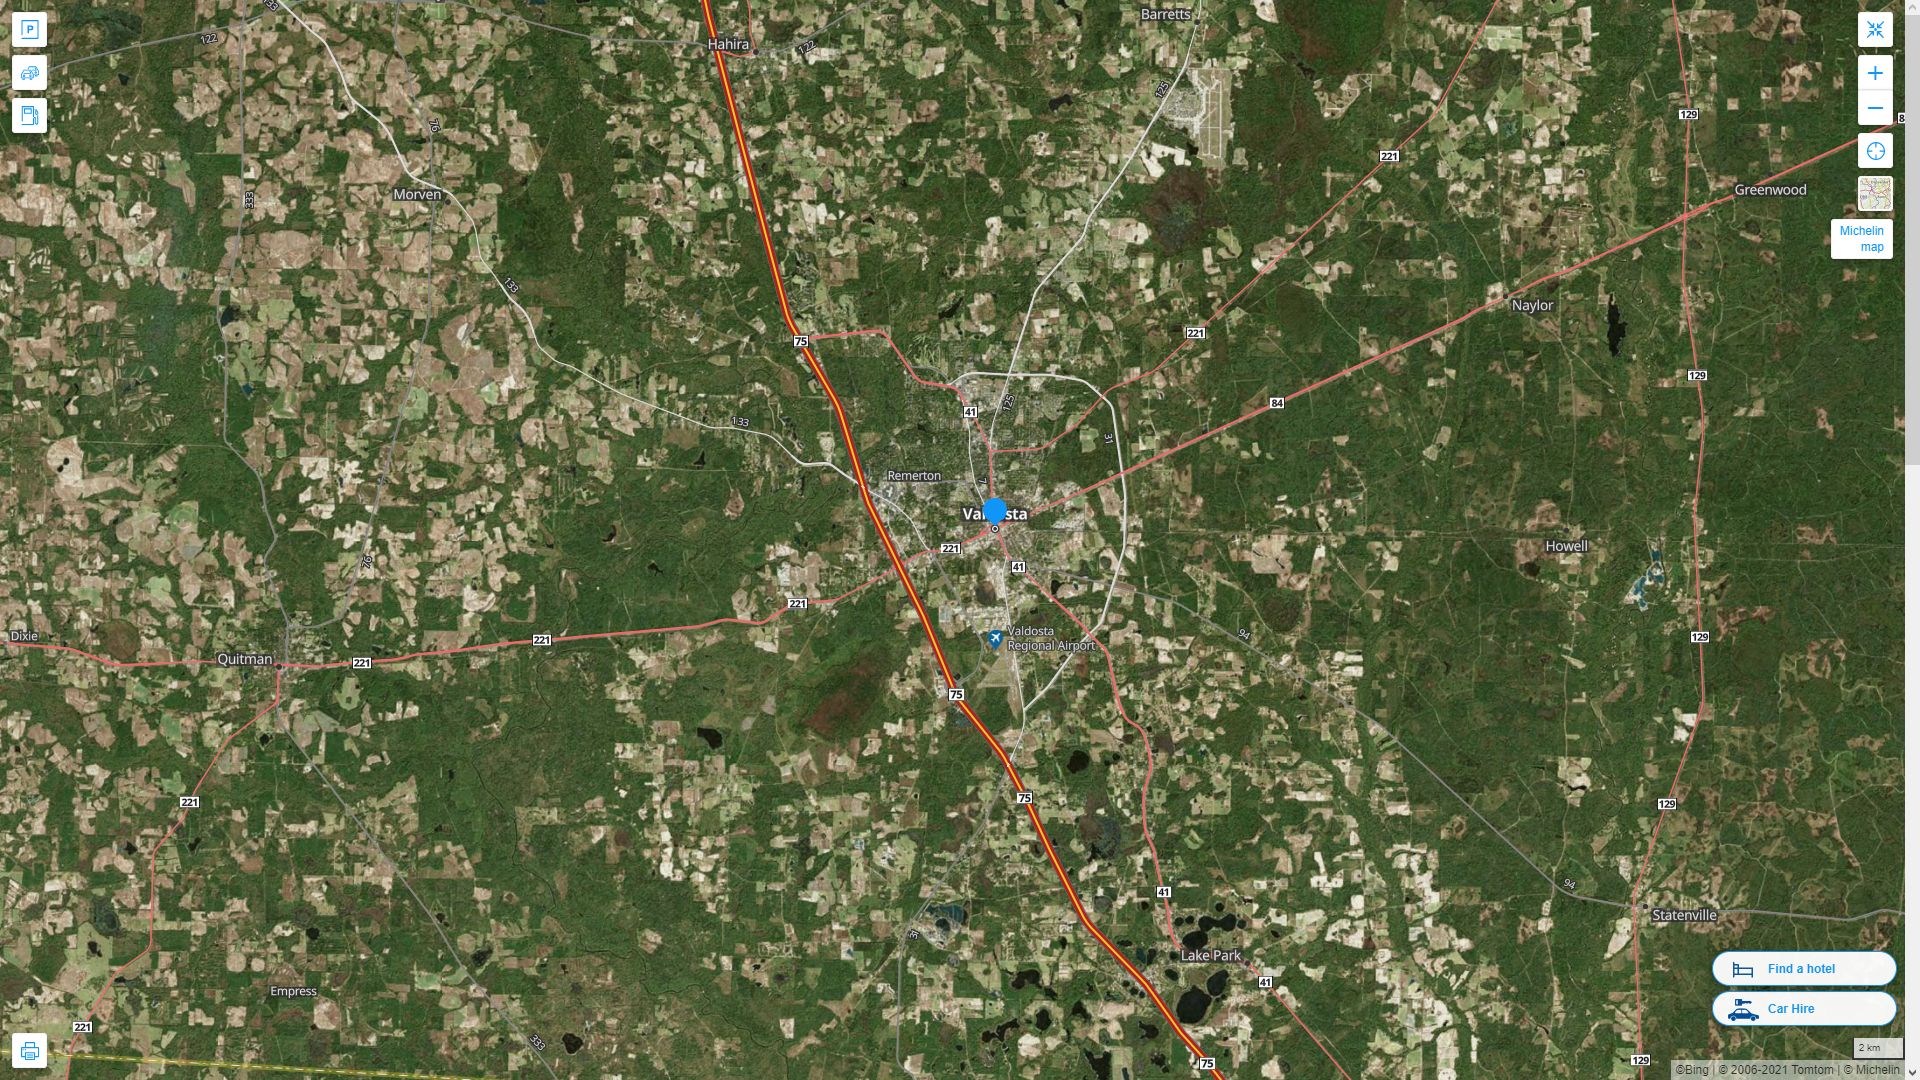 Valdosta Georgia Highway and Road Map with Satellite View